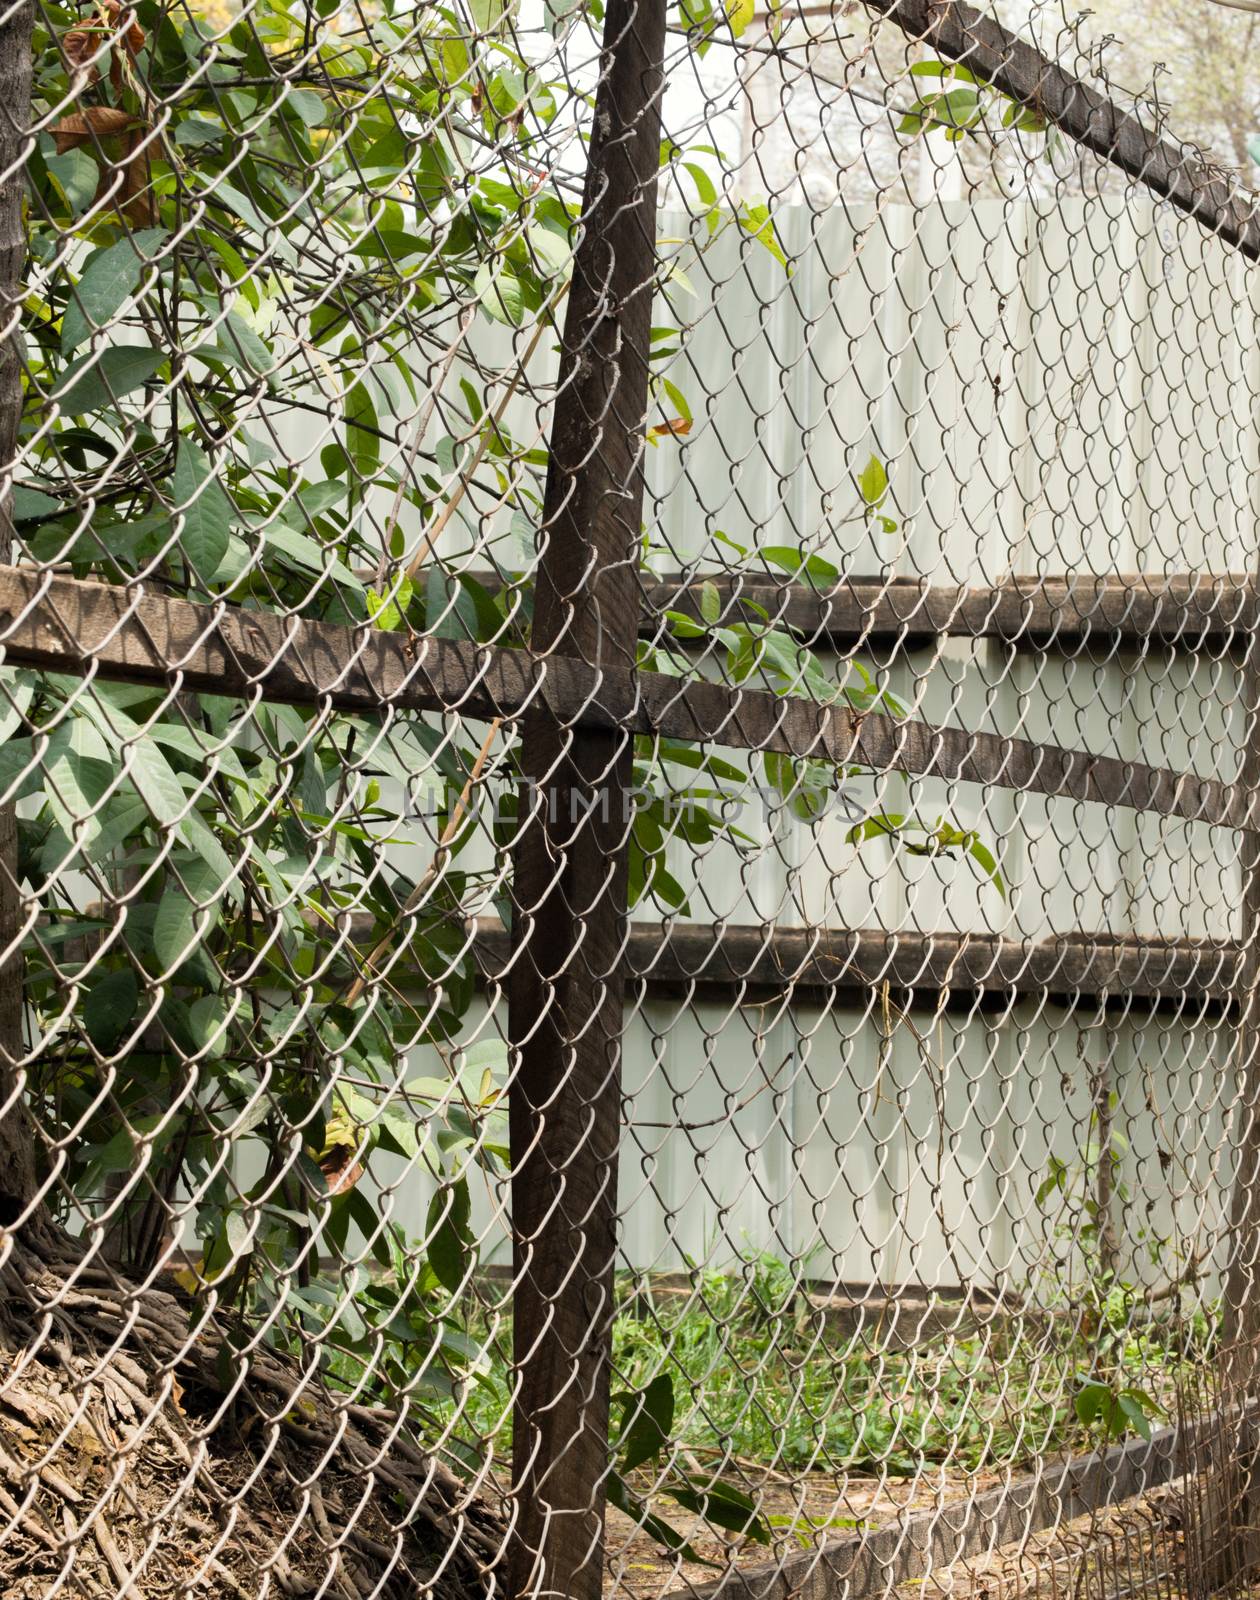 COLOR PHOTO OF CHAIN-LINK FENCE (ALSO REFERRED TO AS WIRE NETTING, WIRE-MESH FENCE, CHAIN-WIRE FENCE, CYCLONE FENCE, HURRICANE FENCE, OR DIAMOND-MESH FENCE)